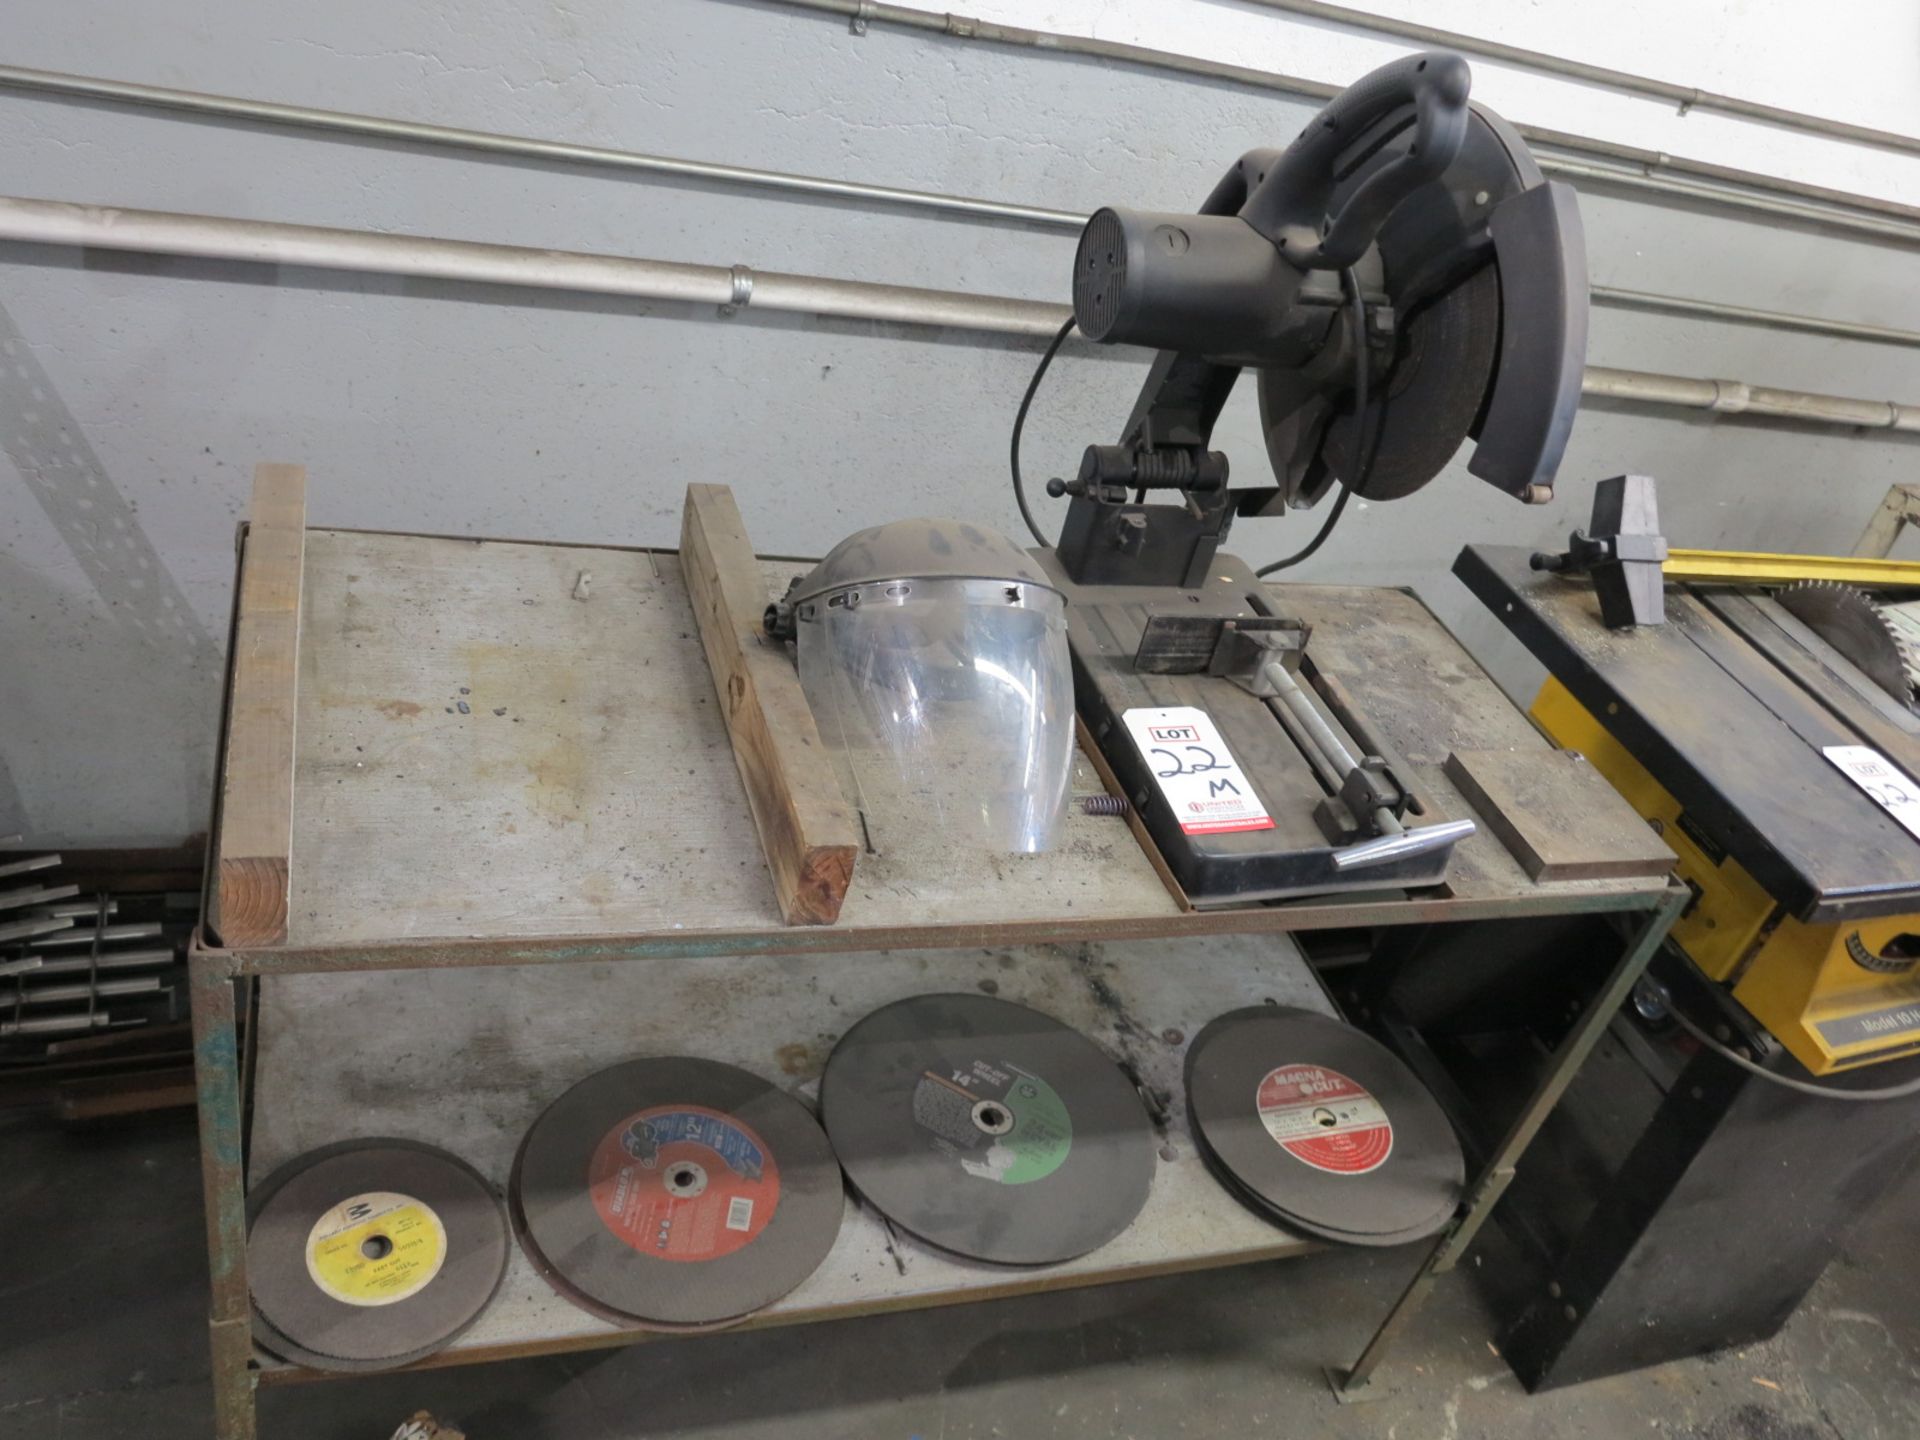 LOT - 14" INDUSTRIAL CUT OFF SAW, W/ BENCH AND EXTRA BLADES